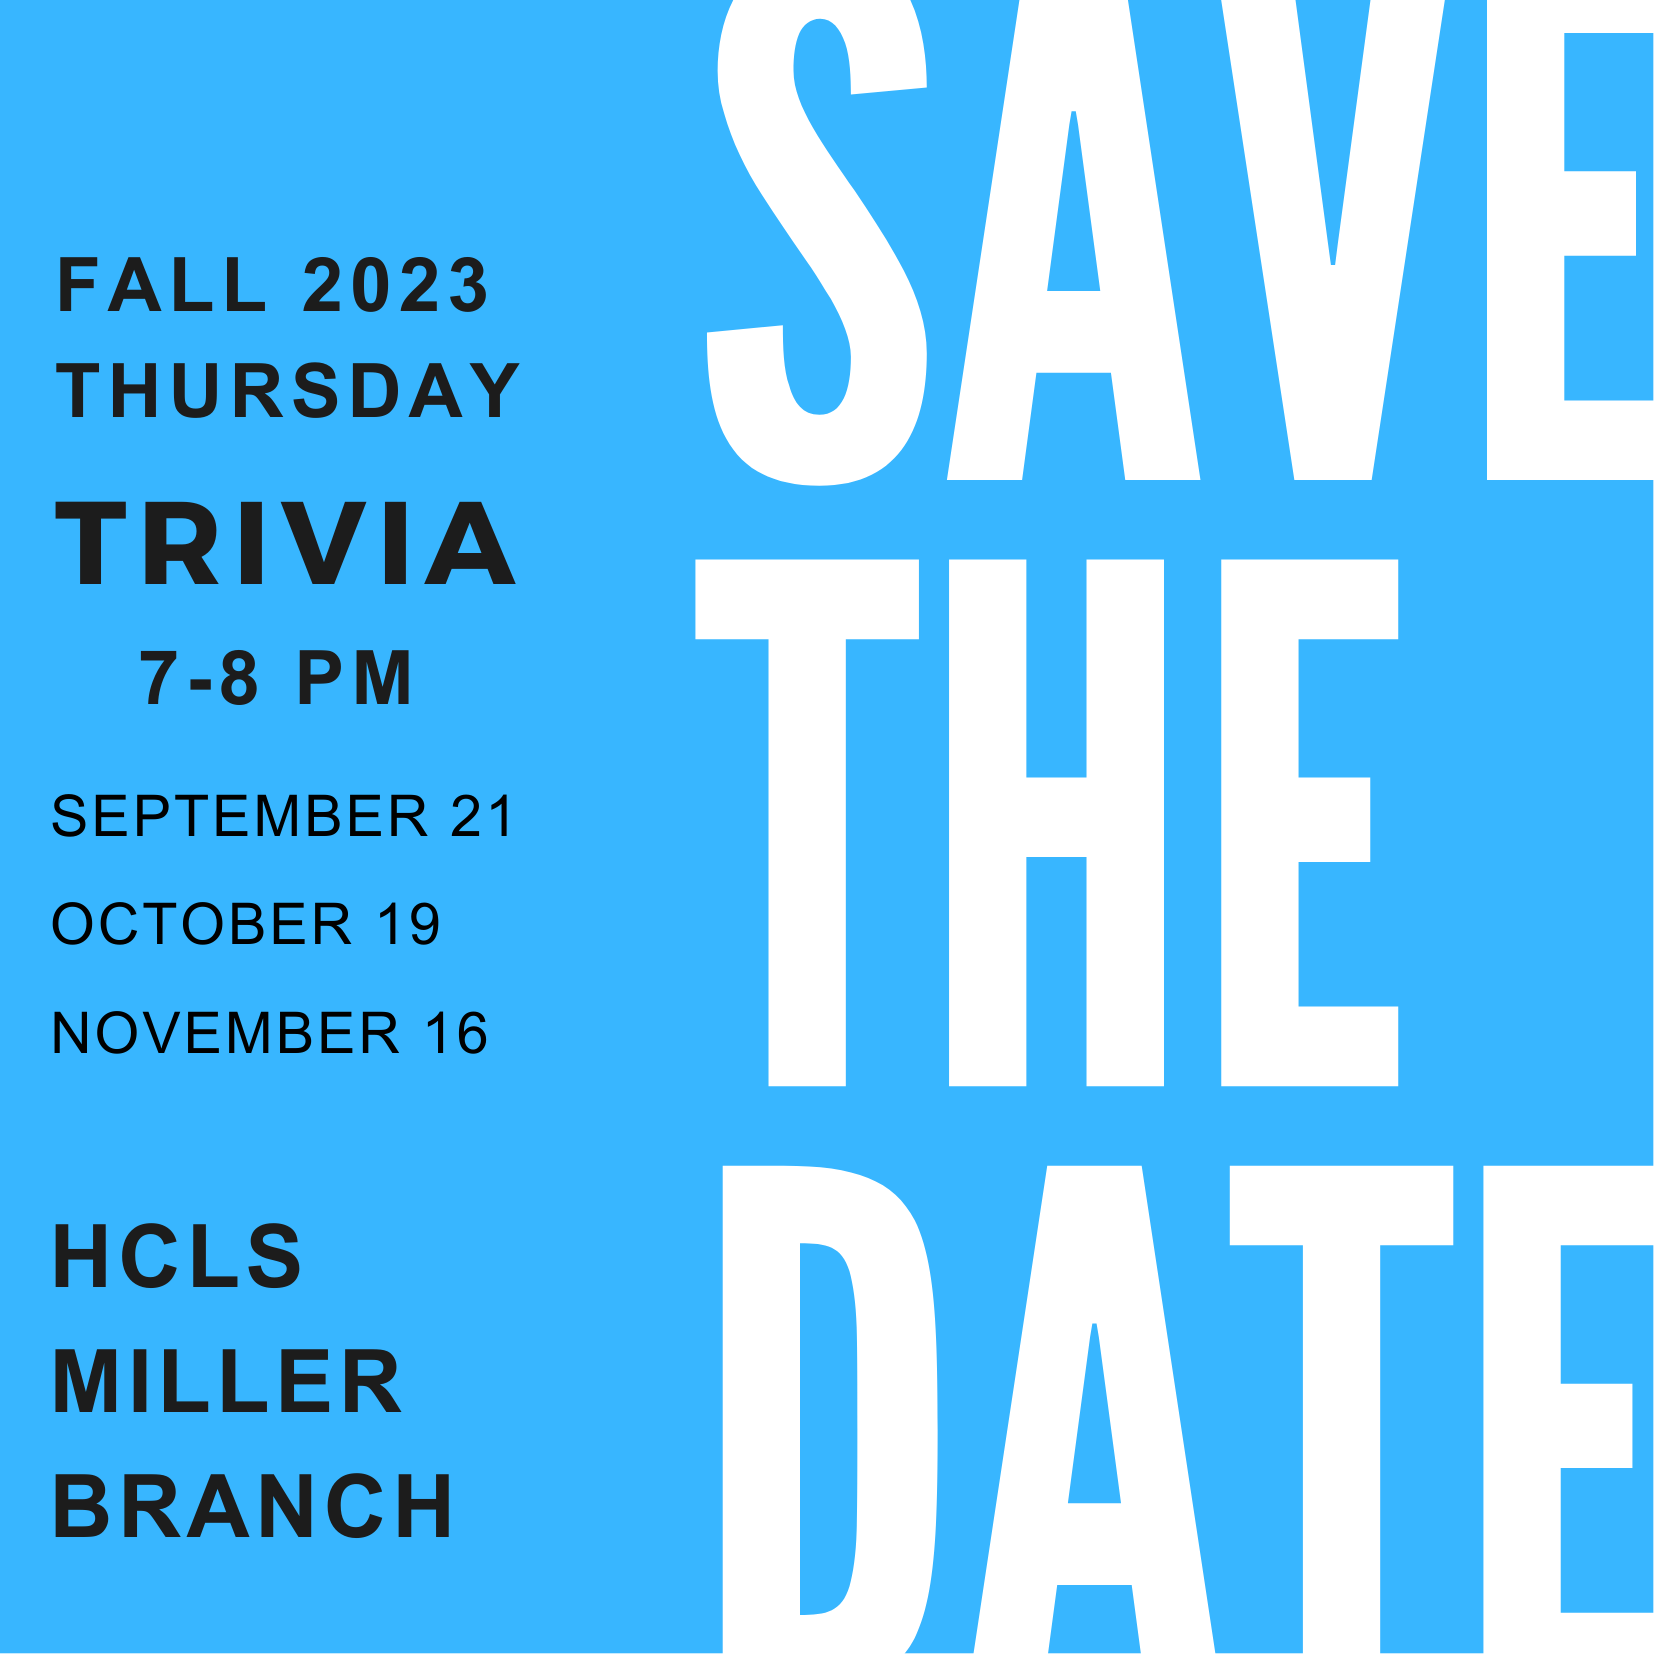 Save the date with Fall Trivia dates listed September 21, October 19 and November 16